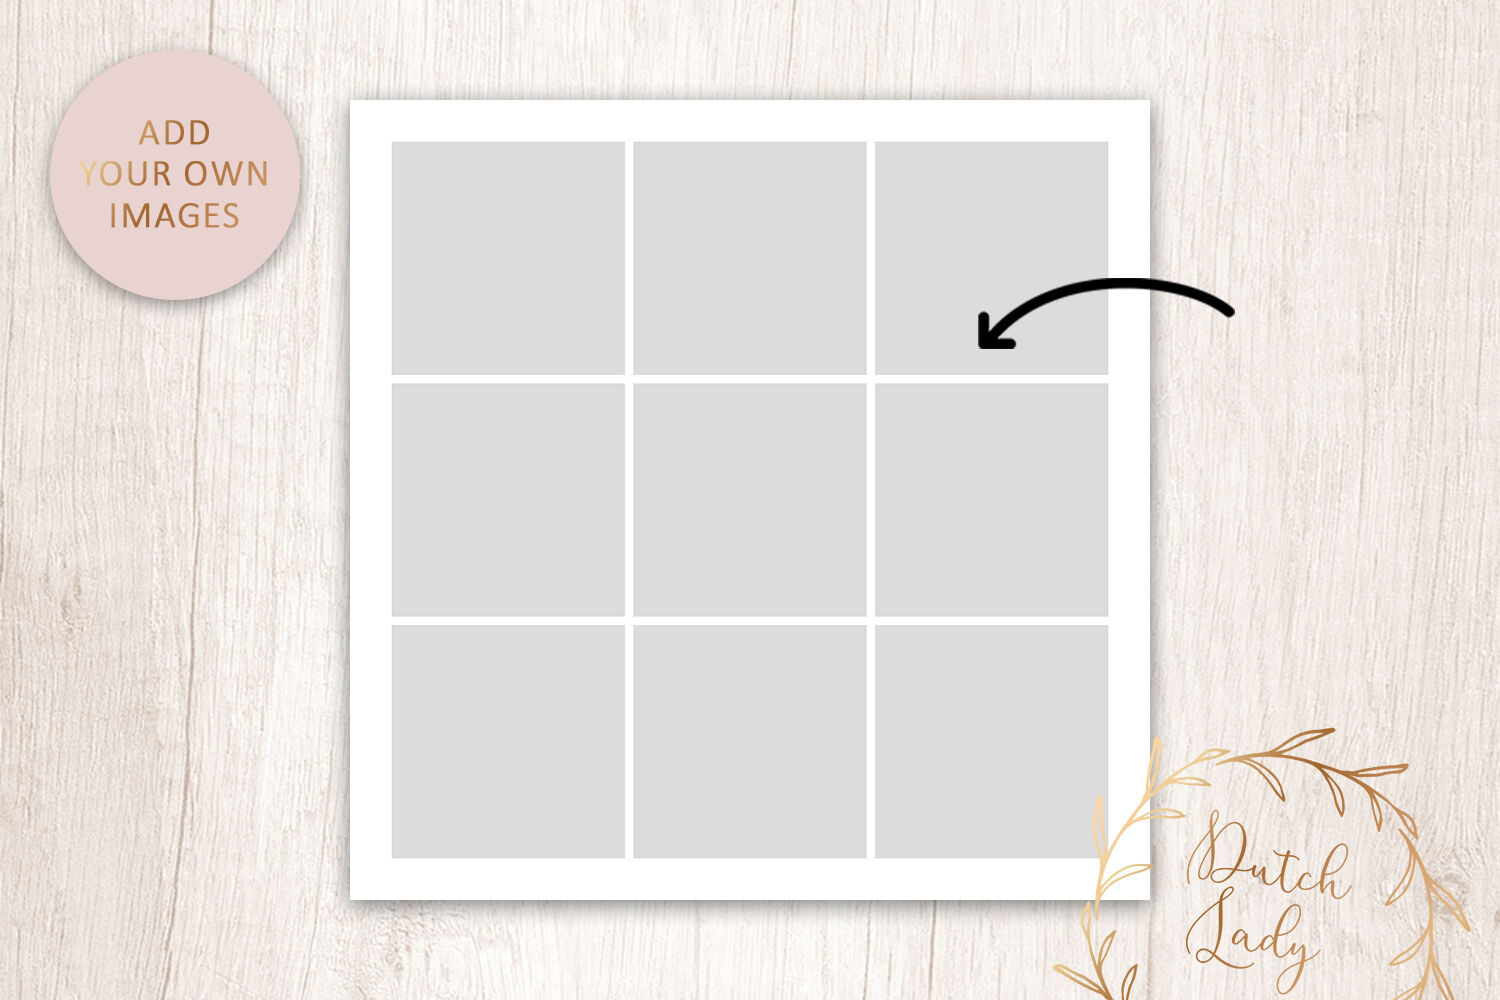 PSD Photo Collage Template #10 By The Dutch Lady Designs | TheHungryJPEG